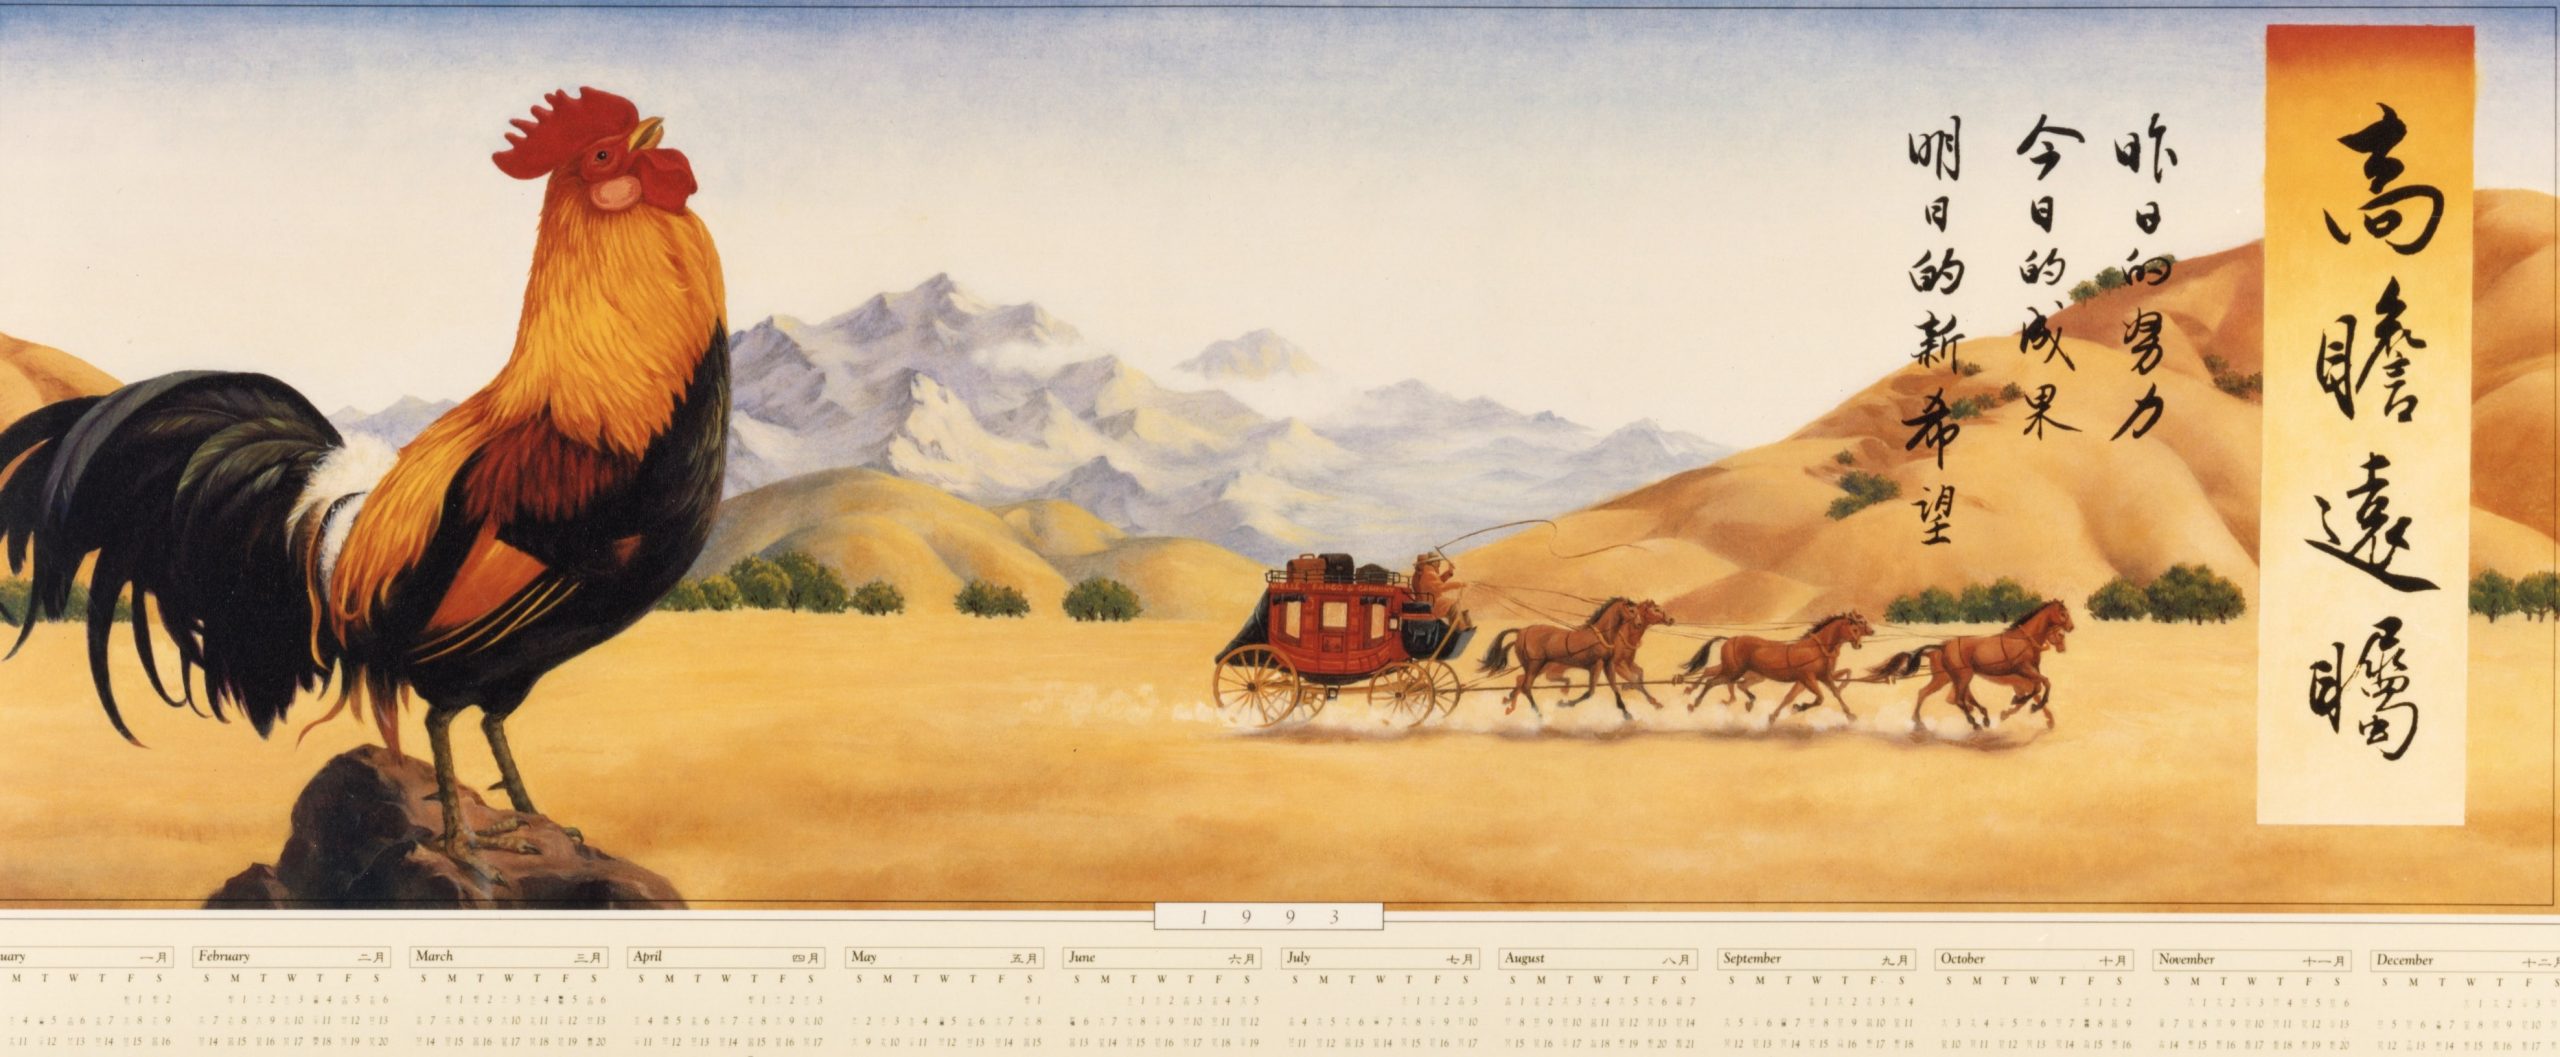 Rooster sits on rock in a desert landscape. In the background, a Wells Fargo stagecoach rolls past.